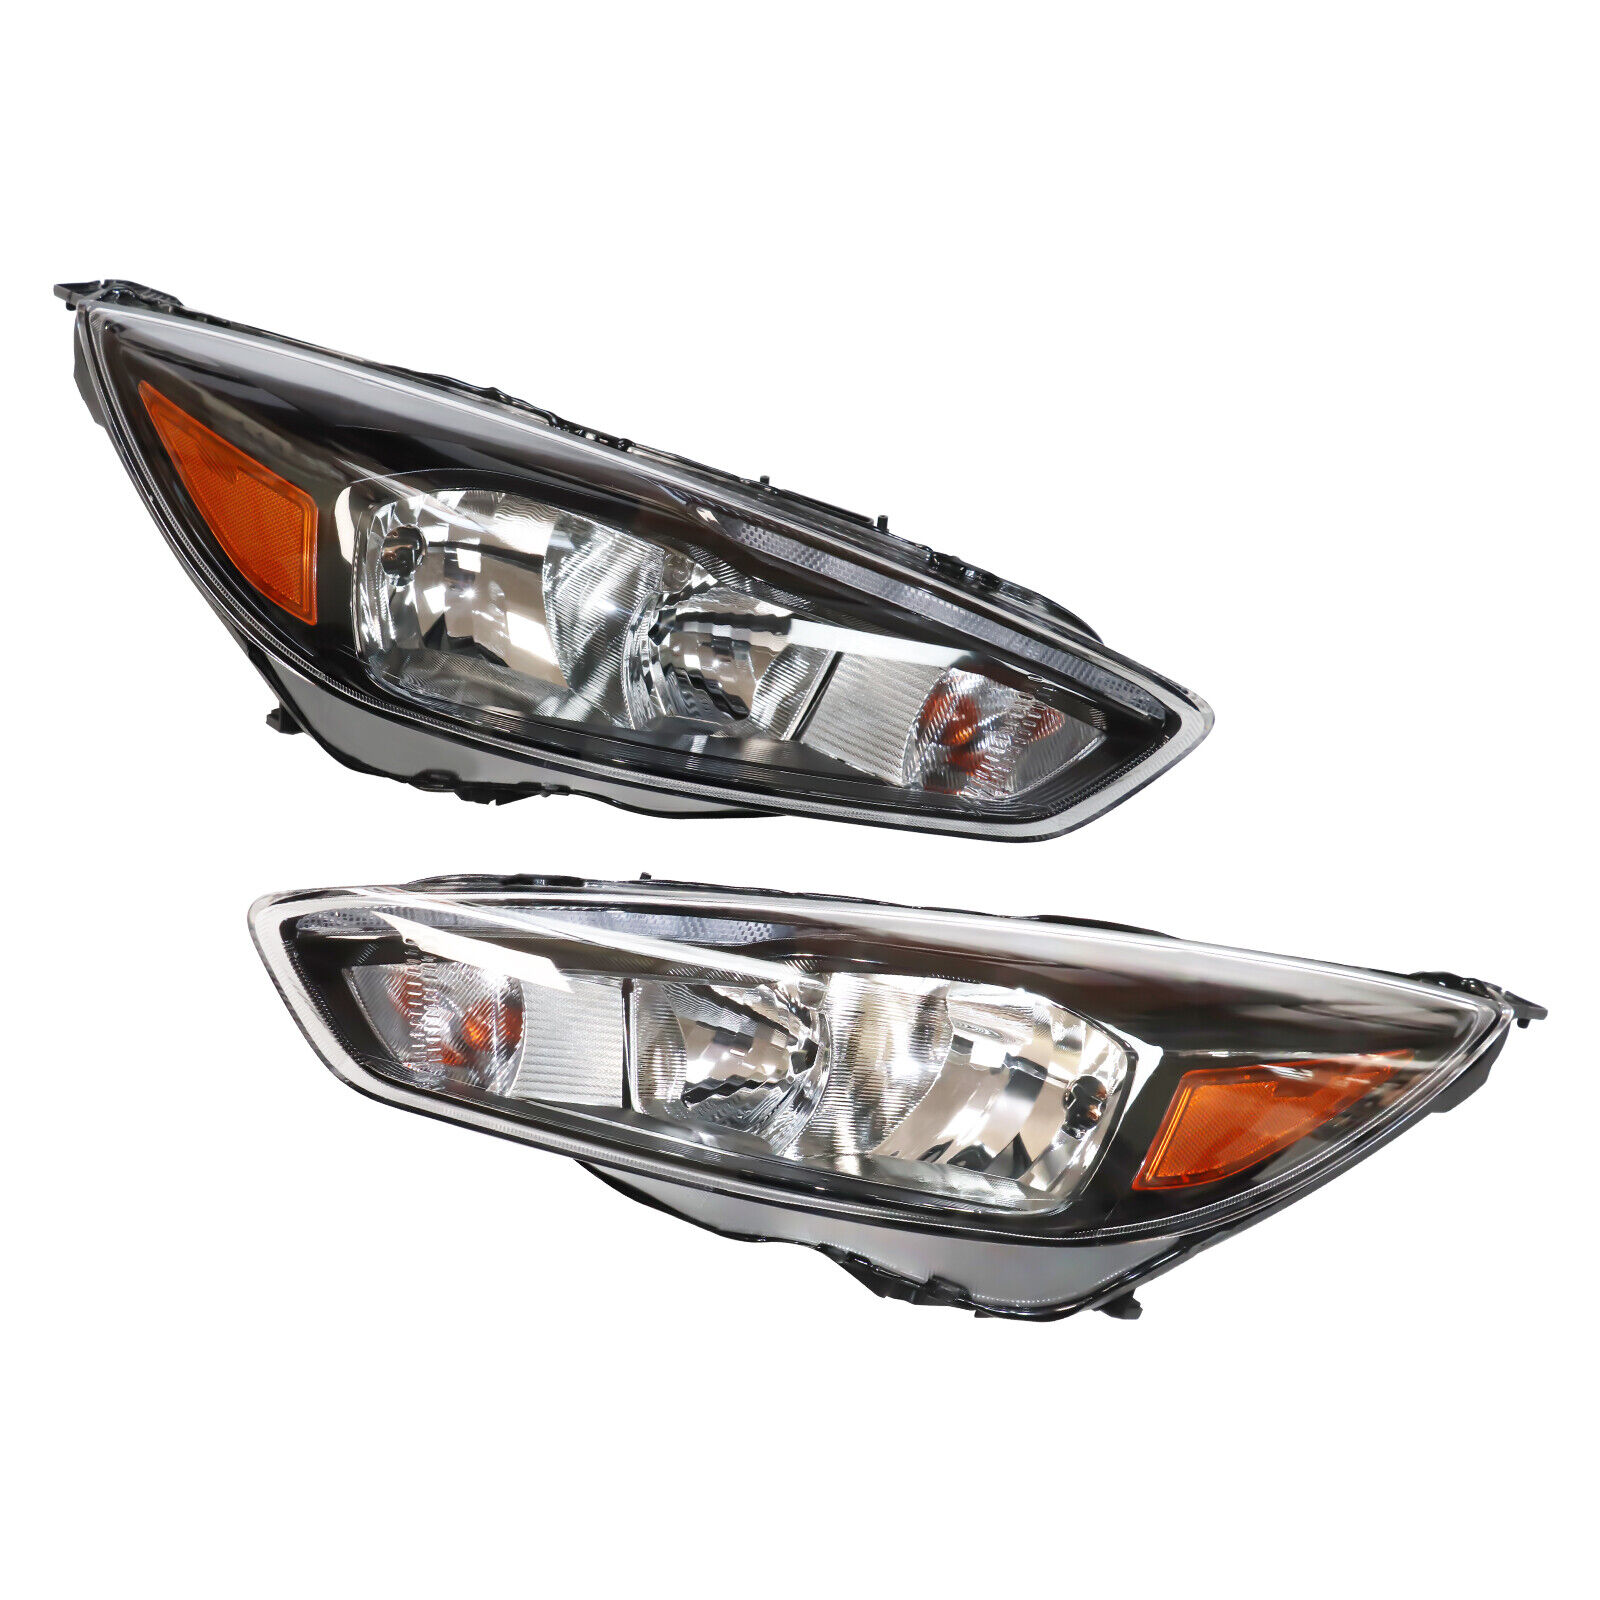 Pair of Headlights w/ LED DRL Right & Left Side fits for Ford Focus 2015-2018